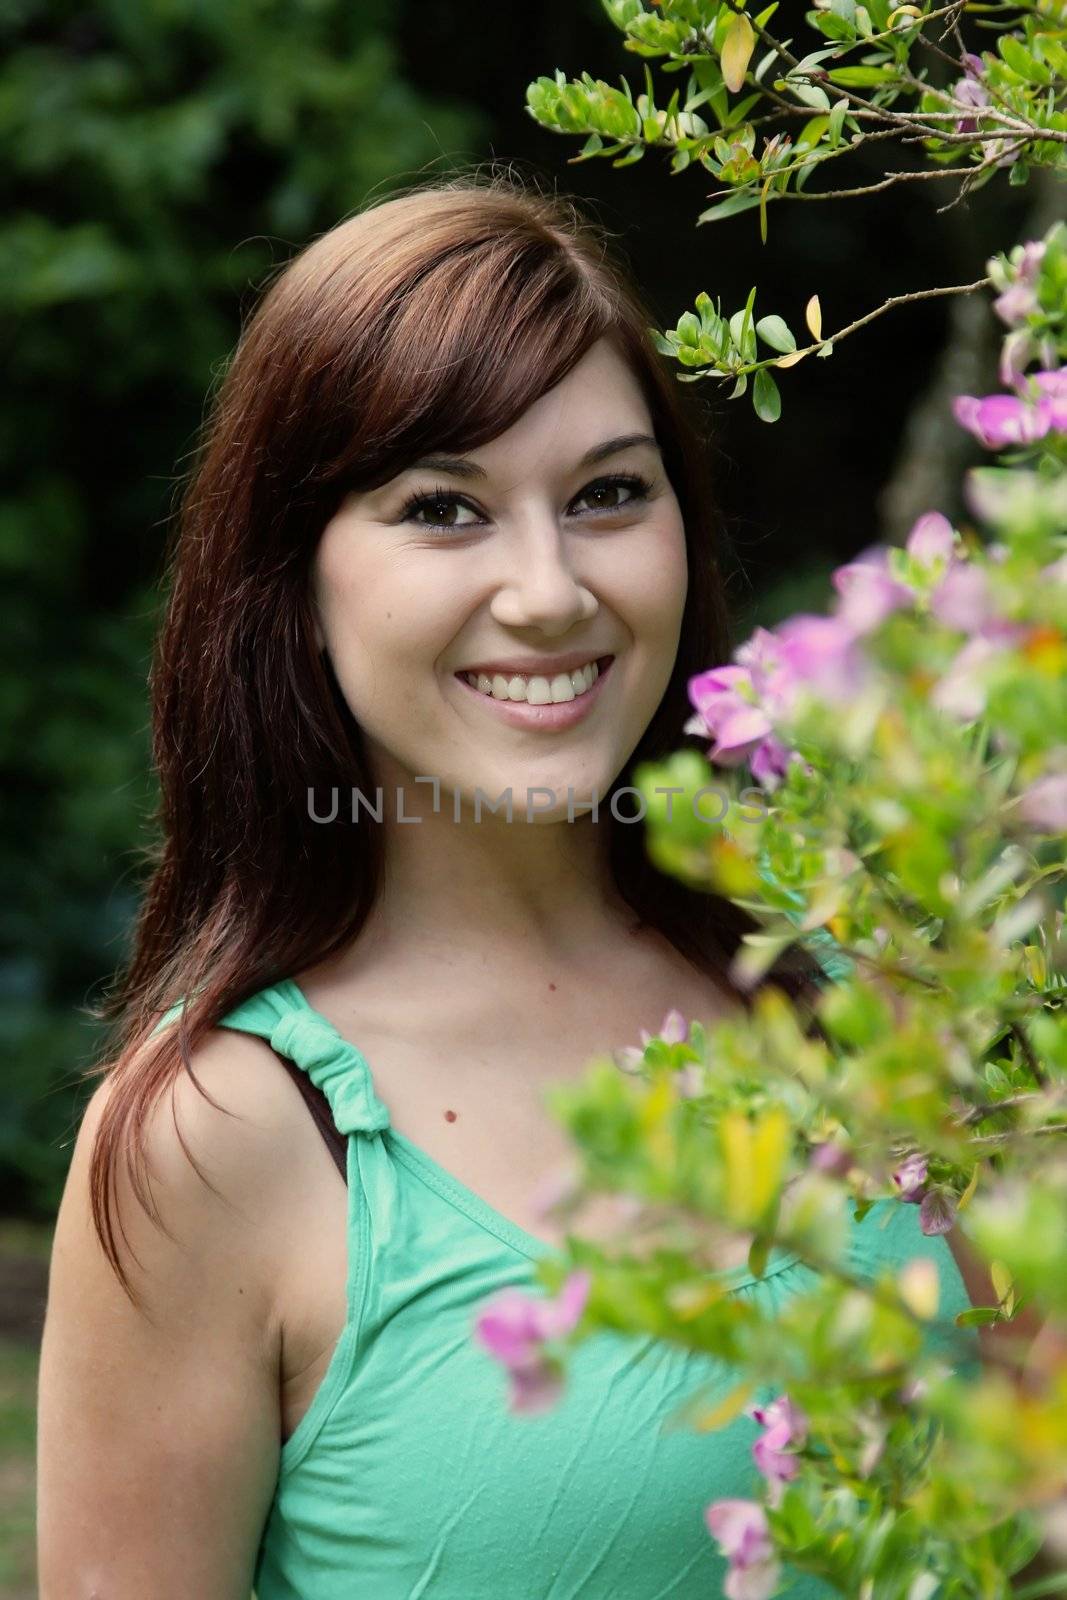 Pretty girl with beautful smile standing outdoors next to flowering bush